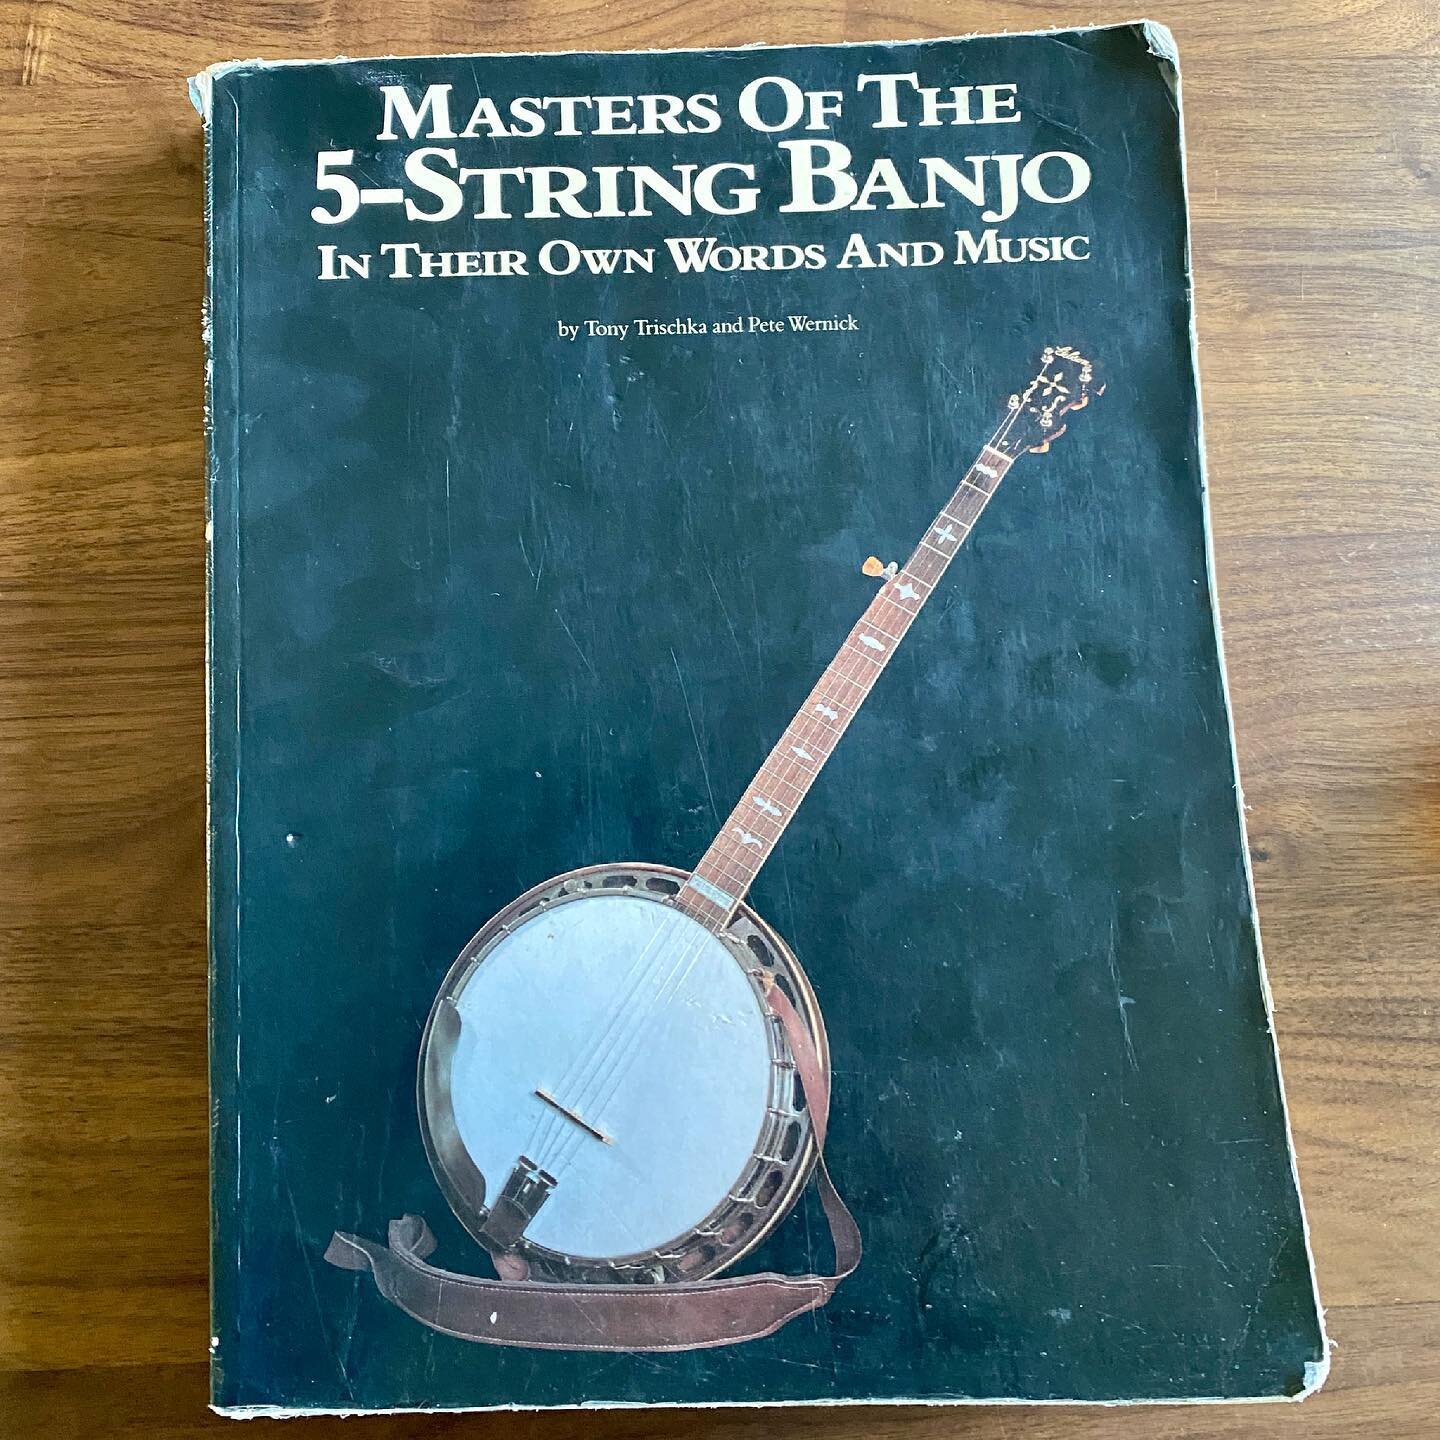 I carried this incredible and important book to countless festivals and concerts to get my heroes to sign in. Check out John Hartford&rsquo;s real signature! 
.
.
.
.
.
We are 1 week away from the Banjo Summit Online (May 14-16). Sign up now! 

.
.
.